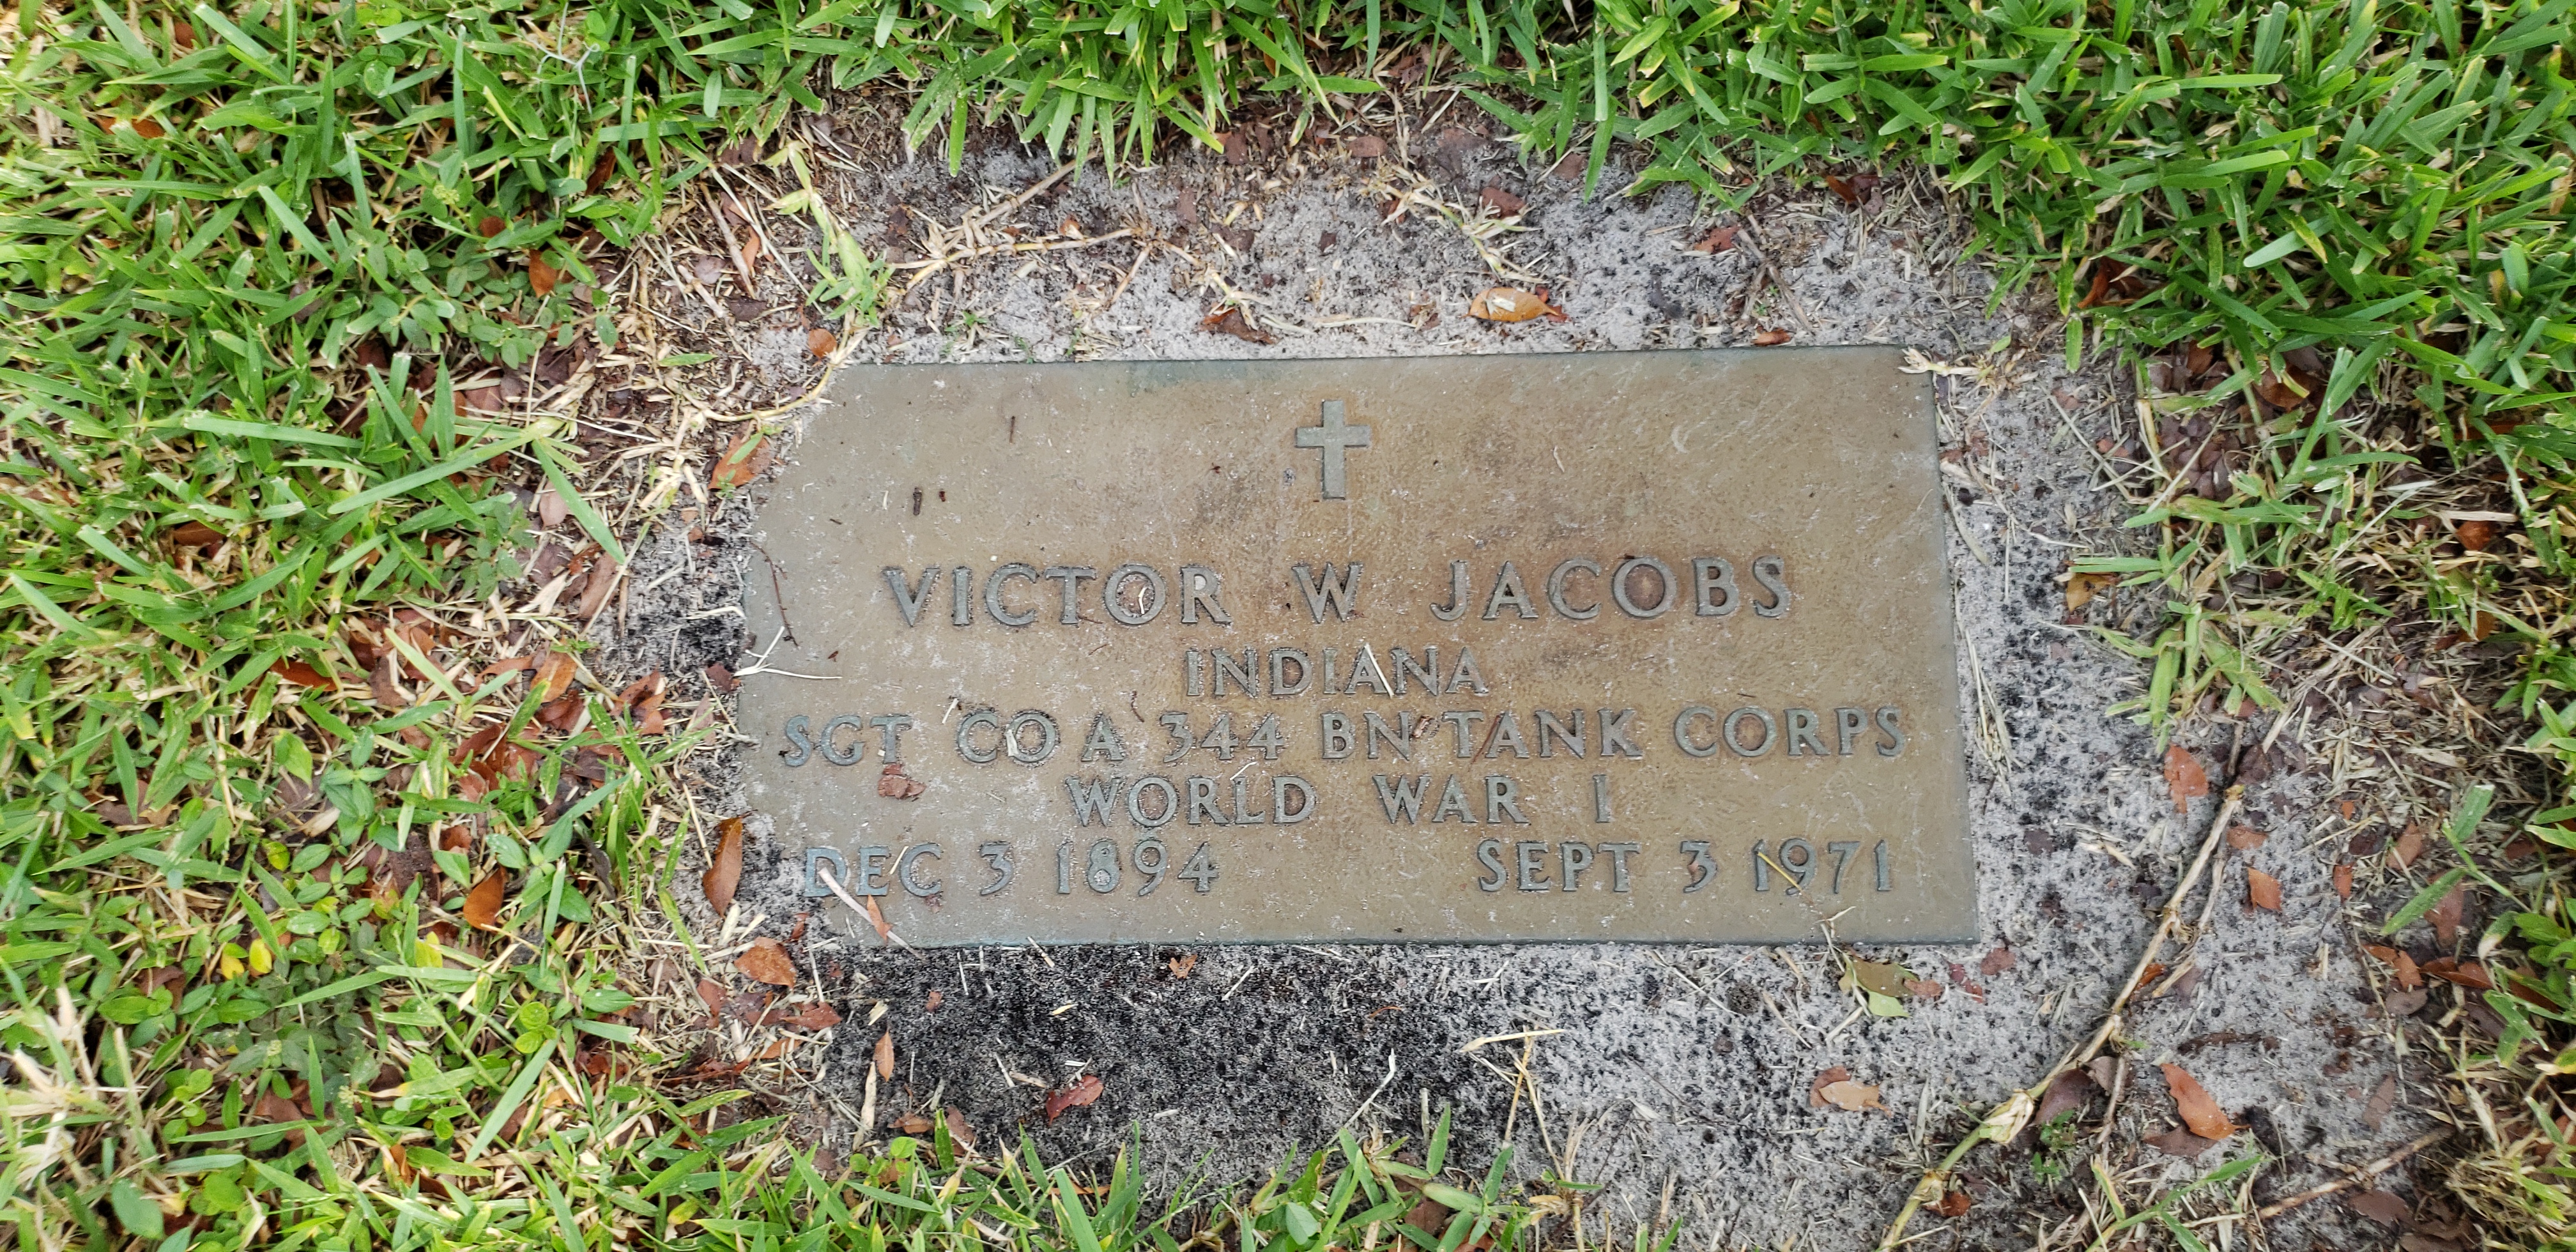 Victor W Jacobs